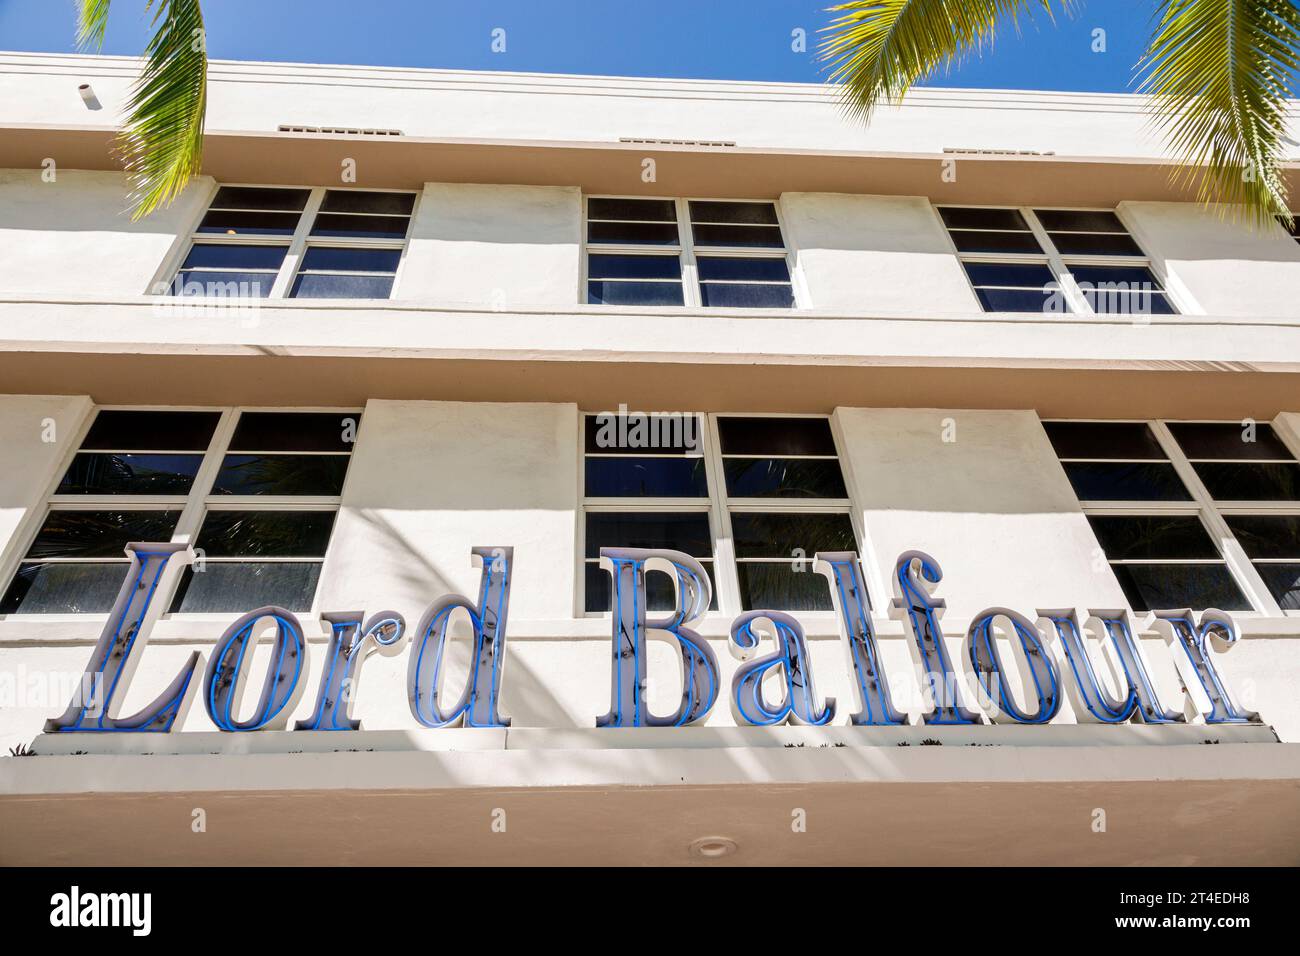 Miami Beach Florida,outside exterior,building front entrance hotel,Ocean Drive,The Balfour Hotel Miami Beach sign,Art Deco style architecture,hotels m Stock Photo